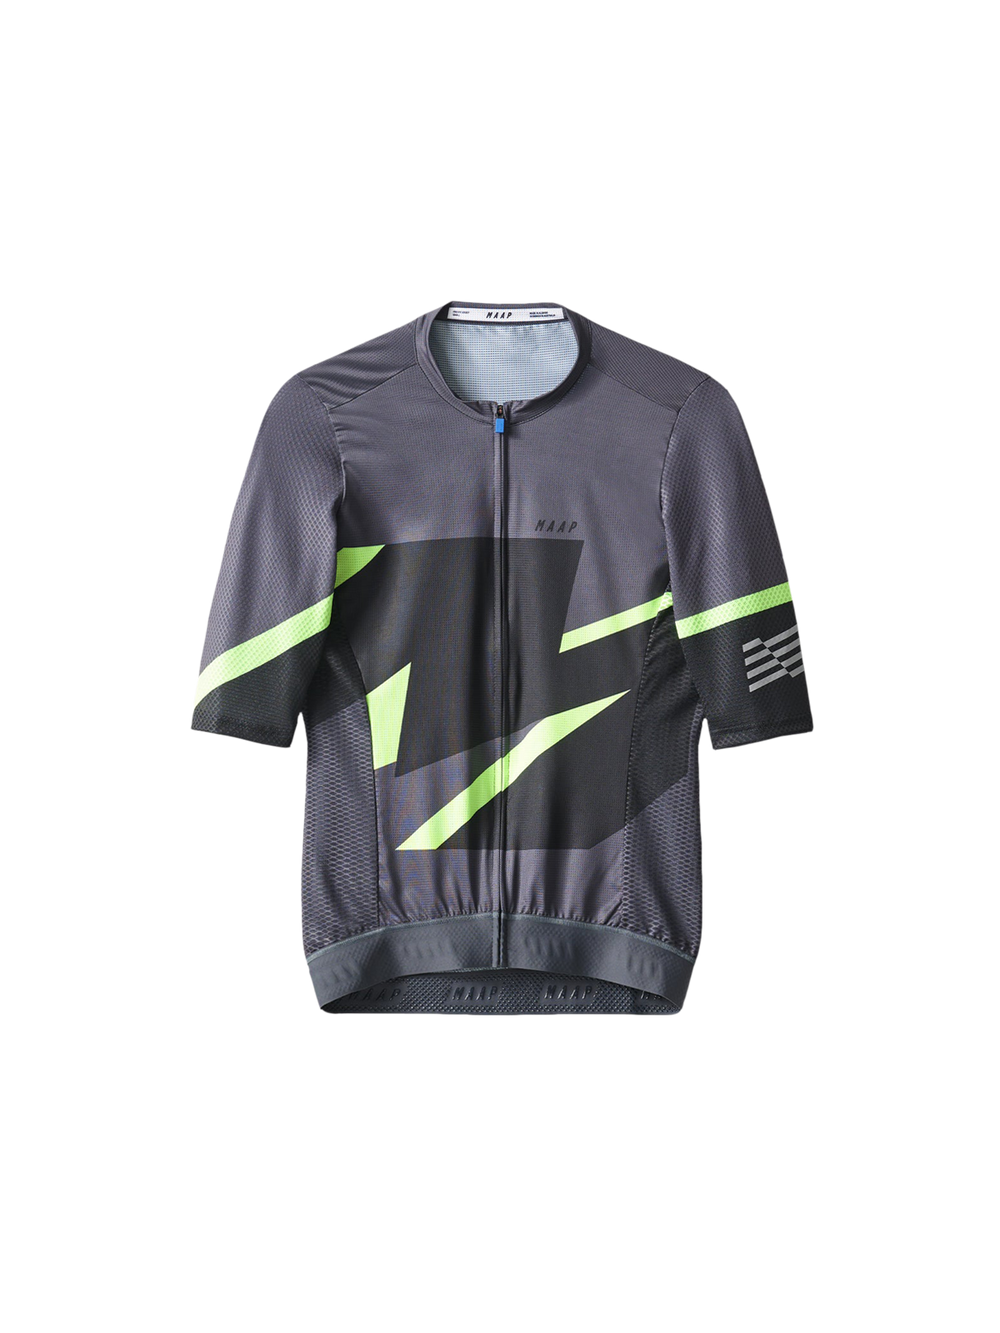 Product Image for Evolve 3D Pro Air Jersey